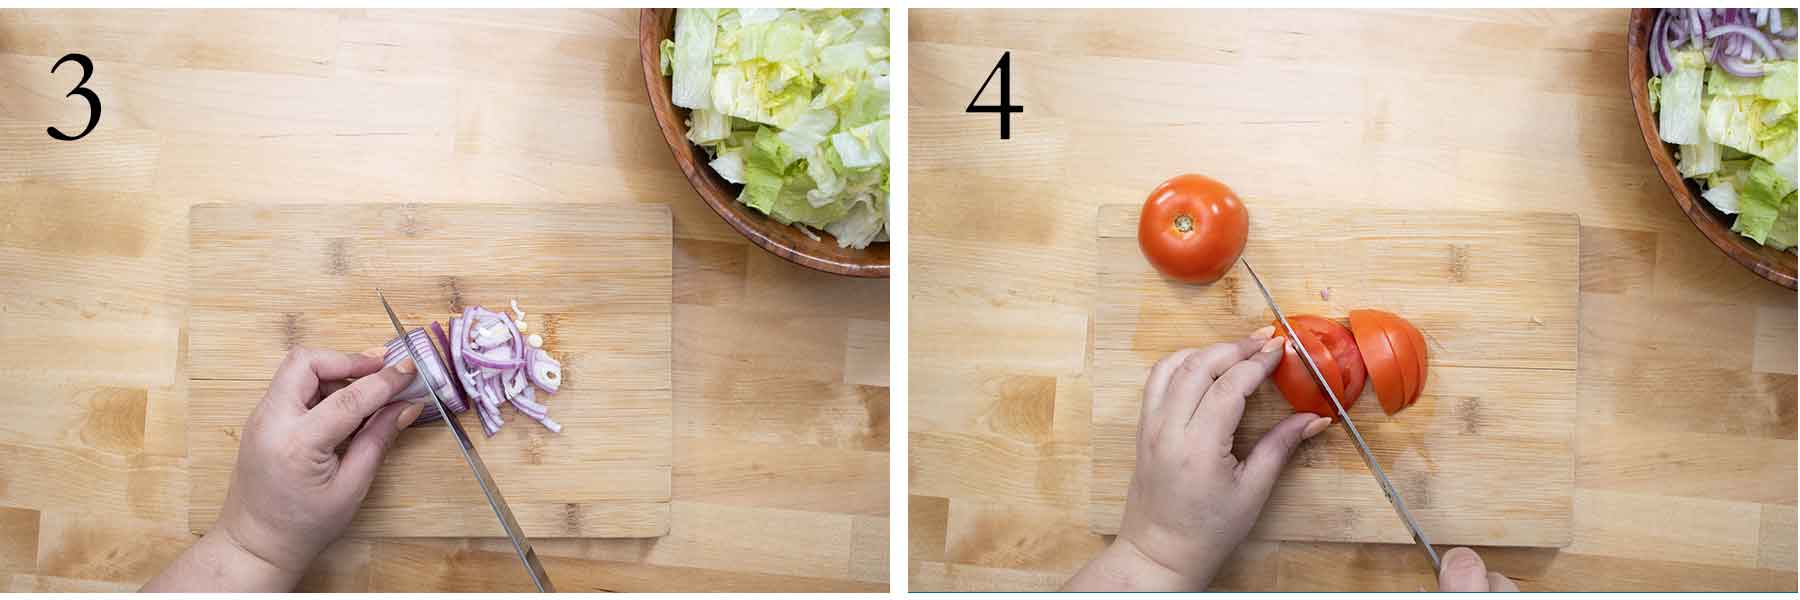 collage on the left slicing red onion and on the right slicing a tomato.